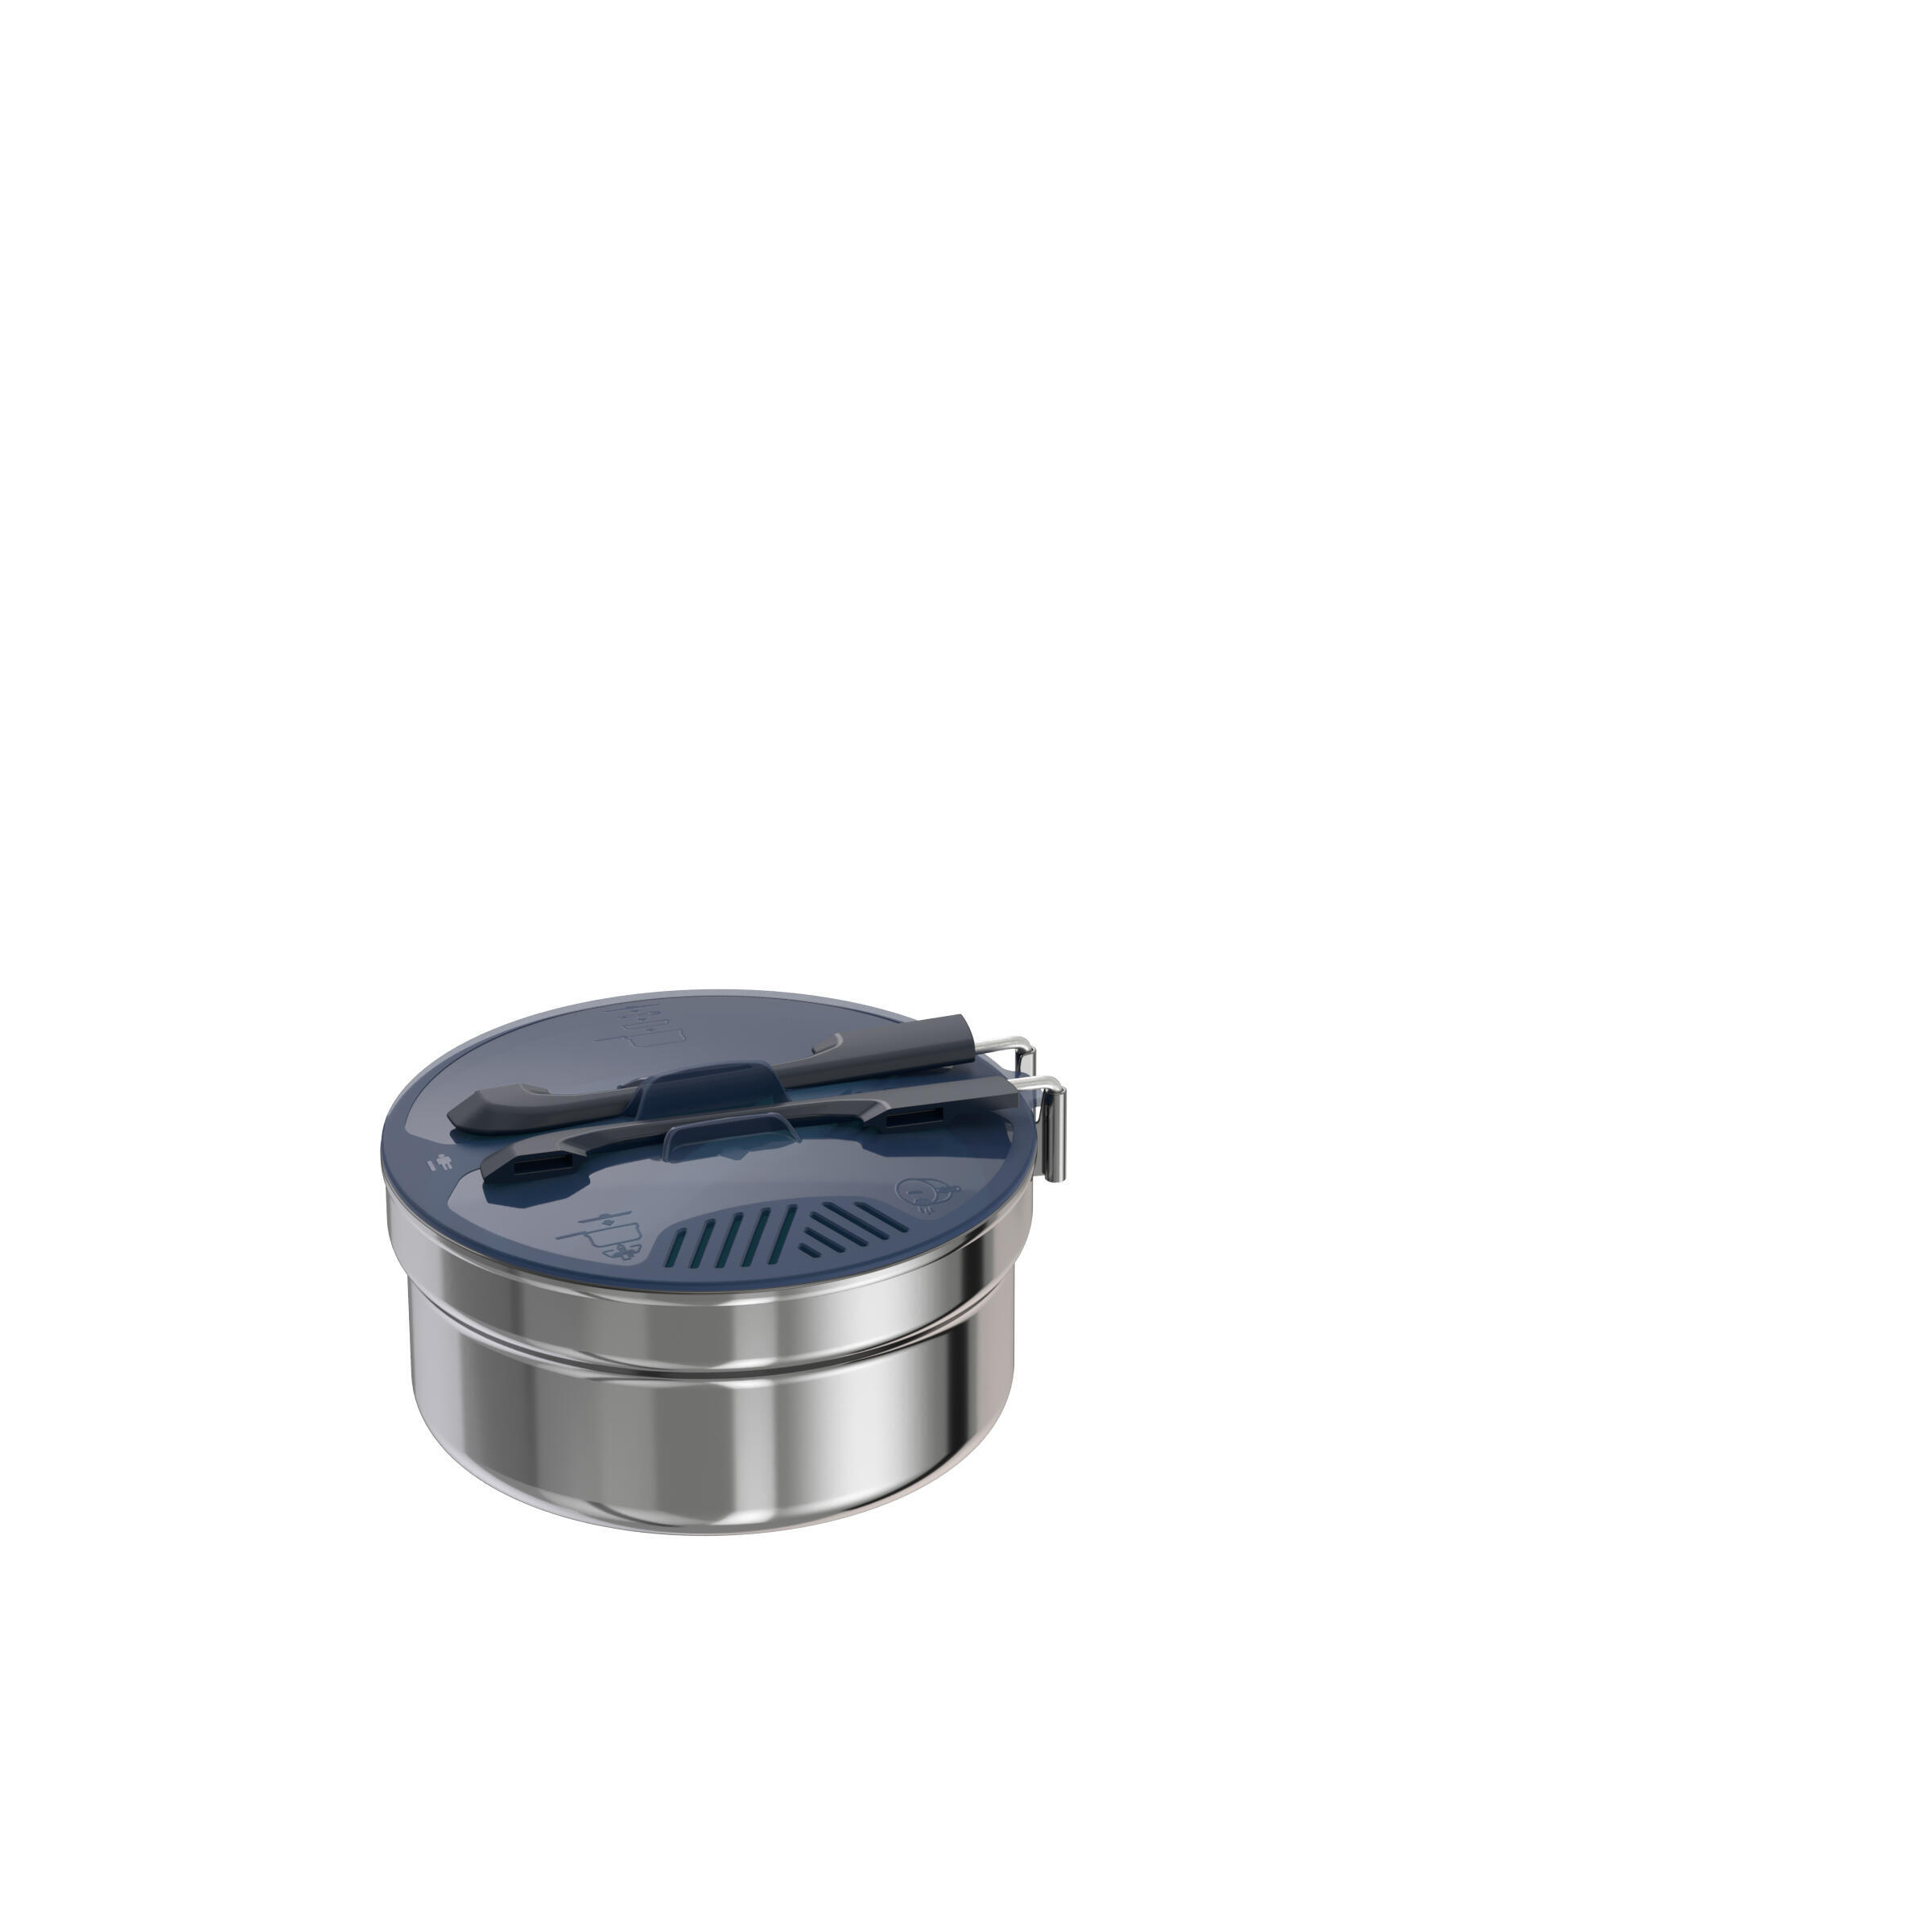 Stainless Steel Camping Cook Set - 1.1L 4/9